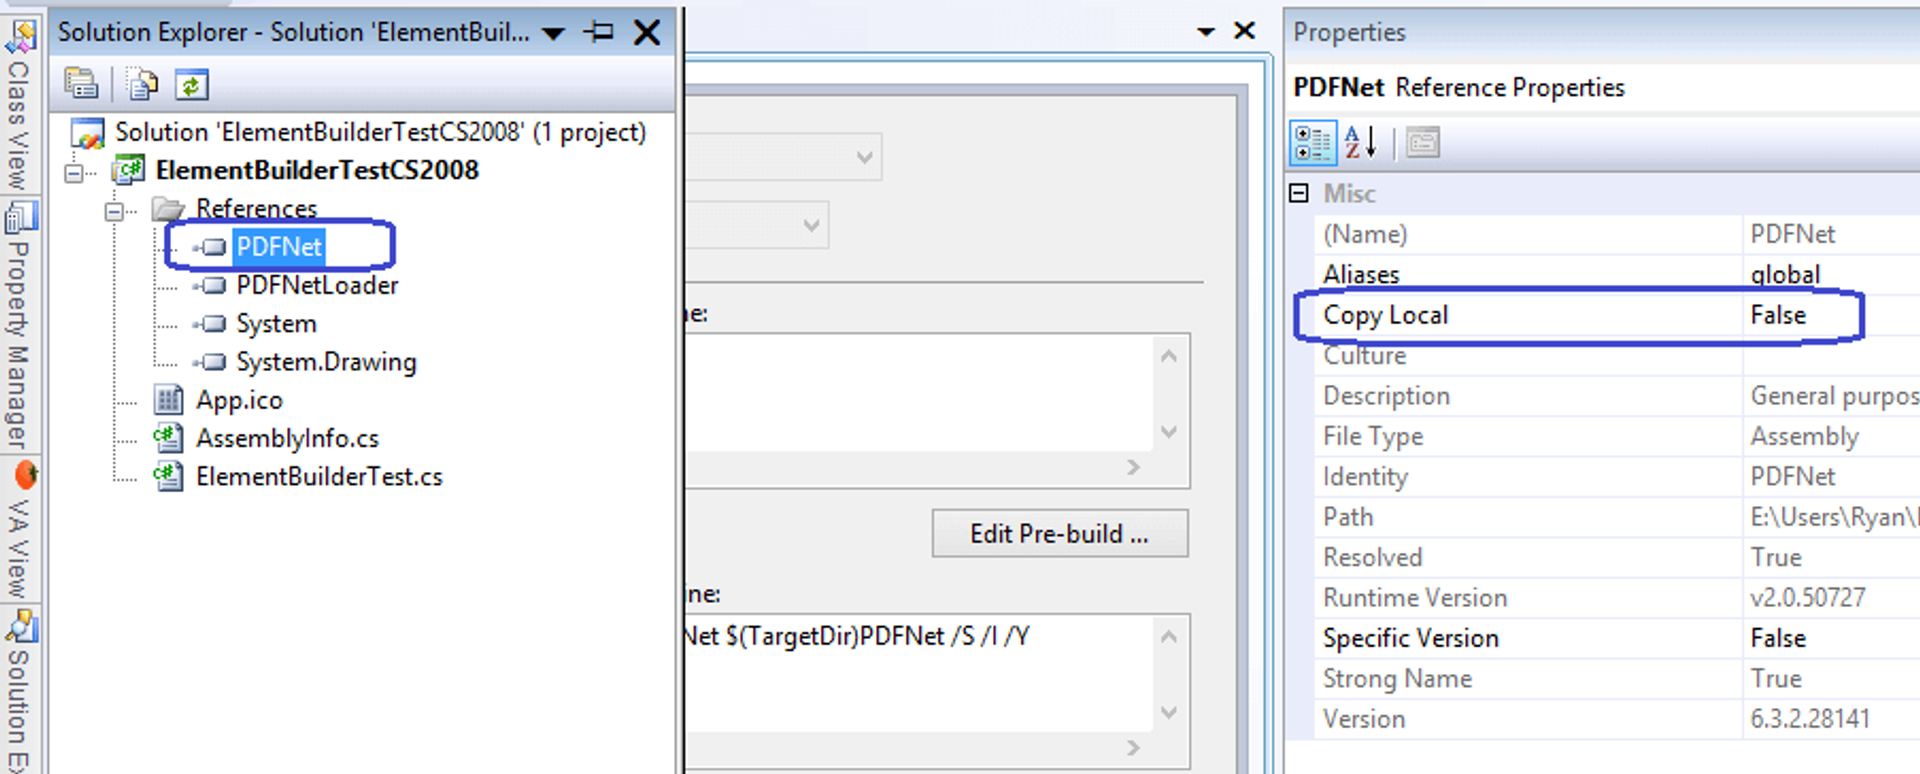 Changing "Copy Local" property to false in solution explorer. 